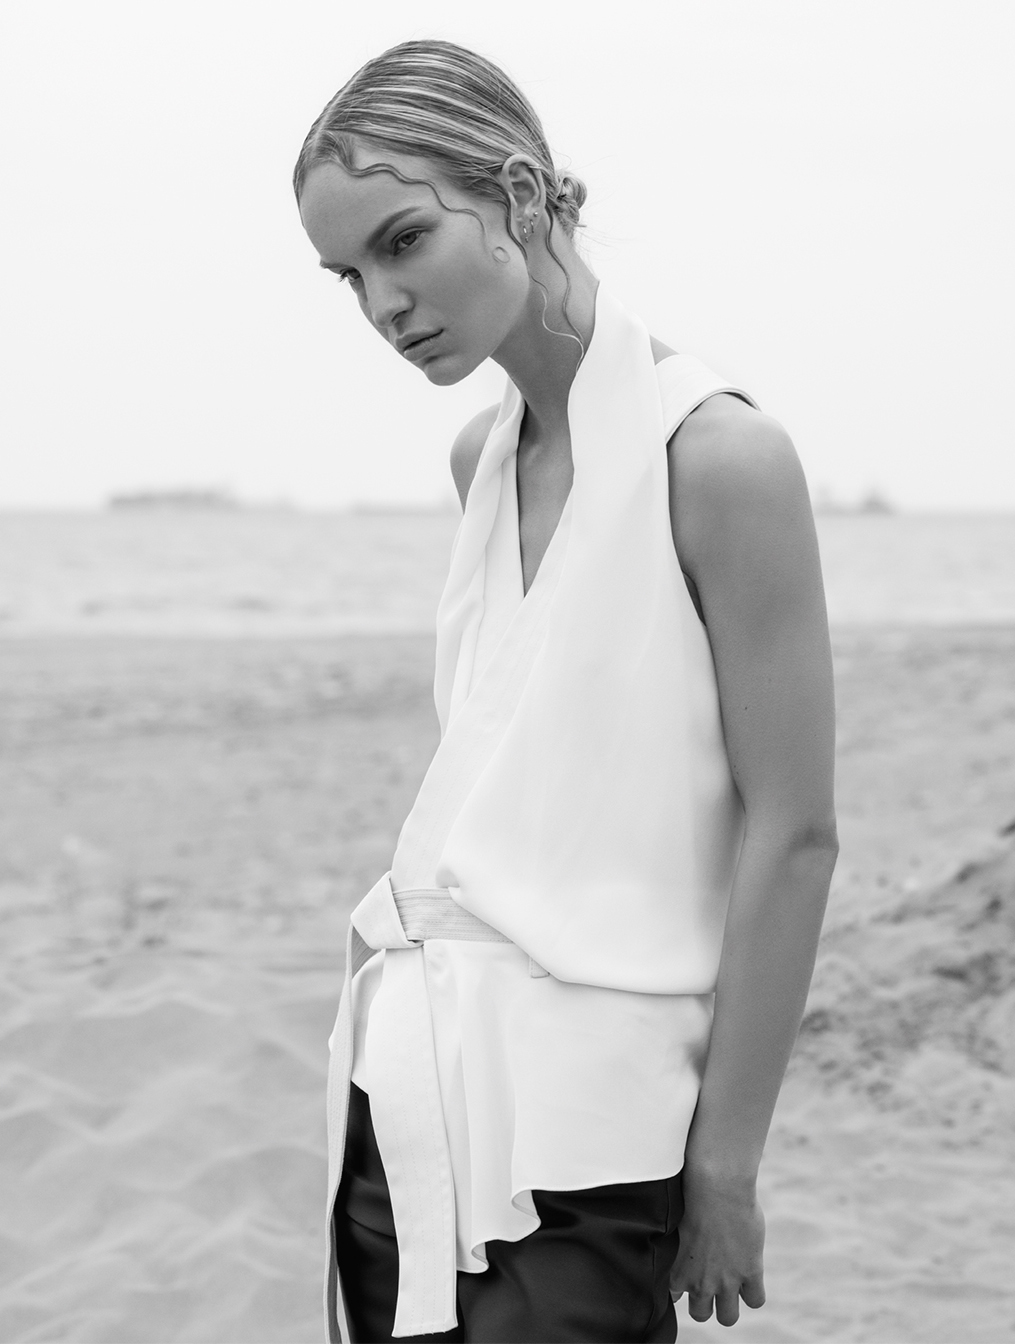 nicola haffmans by ahmet unver for l'officiel turkey may 2015 | visual ...